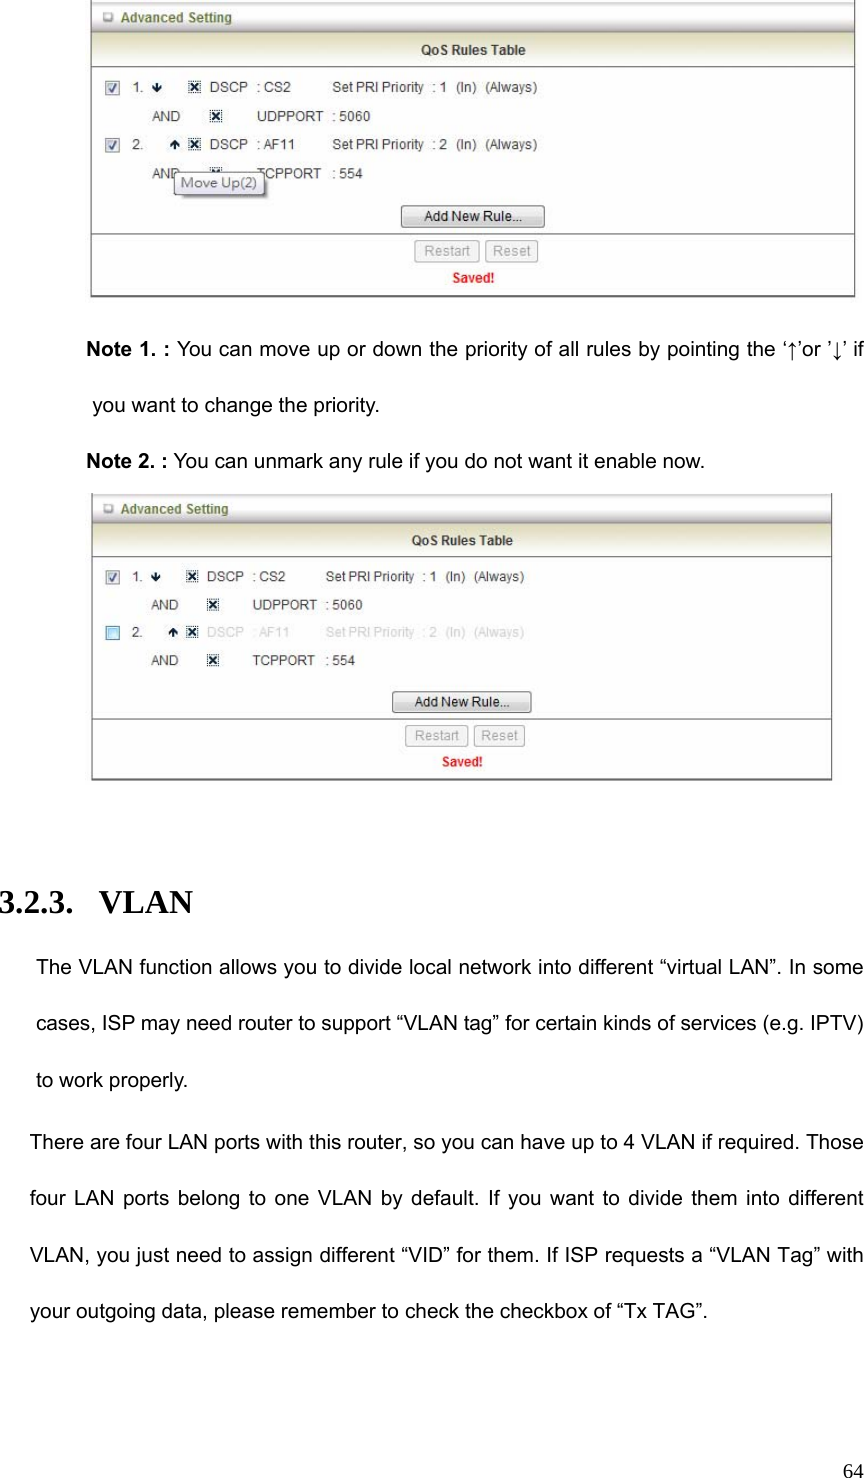  64 Note 1. : You can move up or down the priority of all rules by pointing the ‘↑’or ’↓’ if you want to change the priority.   Note 2. : You can unmark any rule if you do not want it enable now.   3.2.3. VLAN The VLAN function allows you to divide local network into different “virtual LAN”. In some cases, ISP may need router to support “VLAN tag” for certain kinds of services (e.g. IPTV) to work properly.       There are four LAN ports with this router, so you can have up to 4 VLAN if required. Those four LAN ports belong to one VLAN by default. If you want to divide them into different VLAN, you just need to assign different “VID” for them. If ISP requests a “VLAN Tag” with your outgoing data, please remember to check the checkbox of “Tx TAG”. 